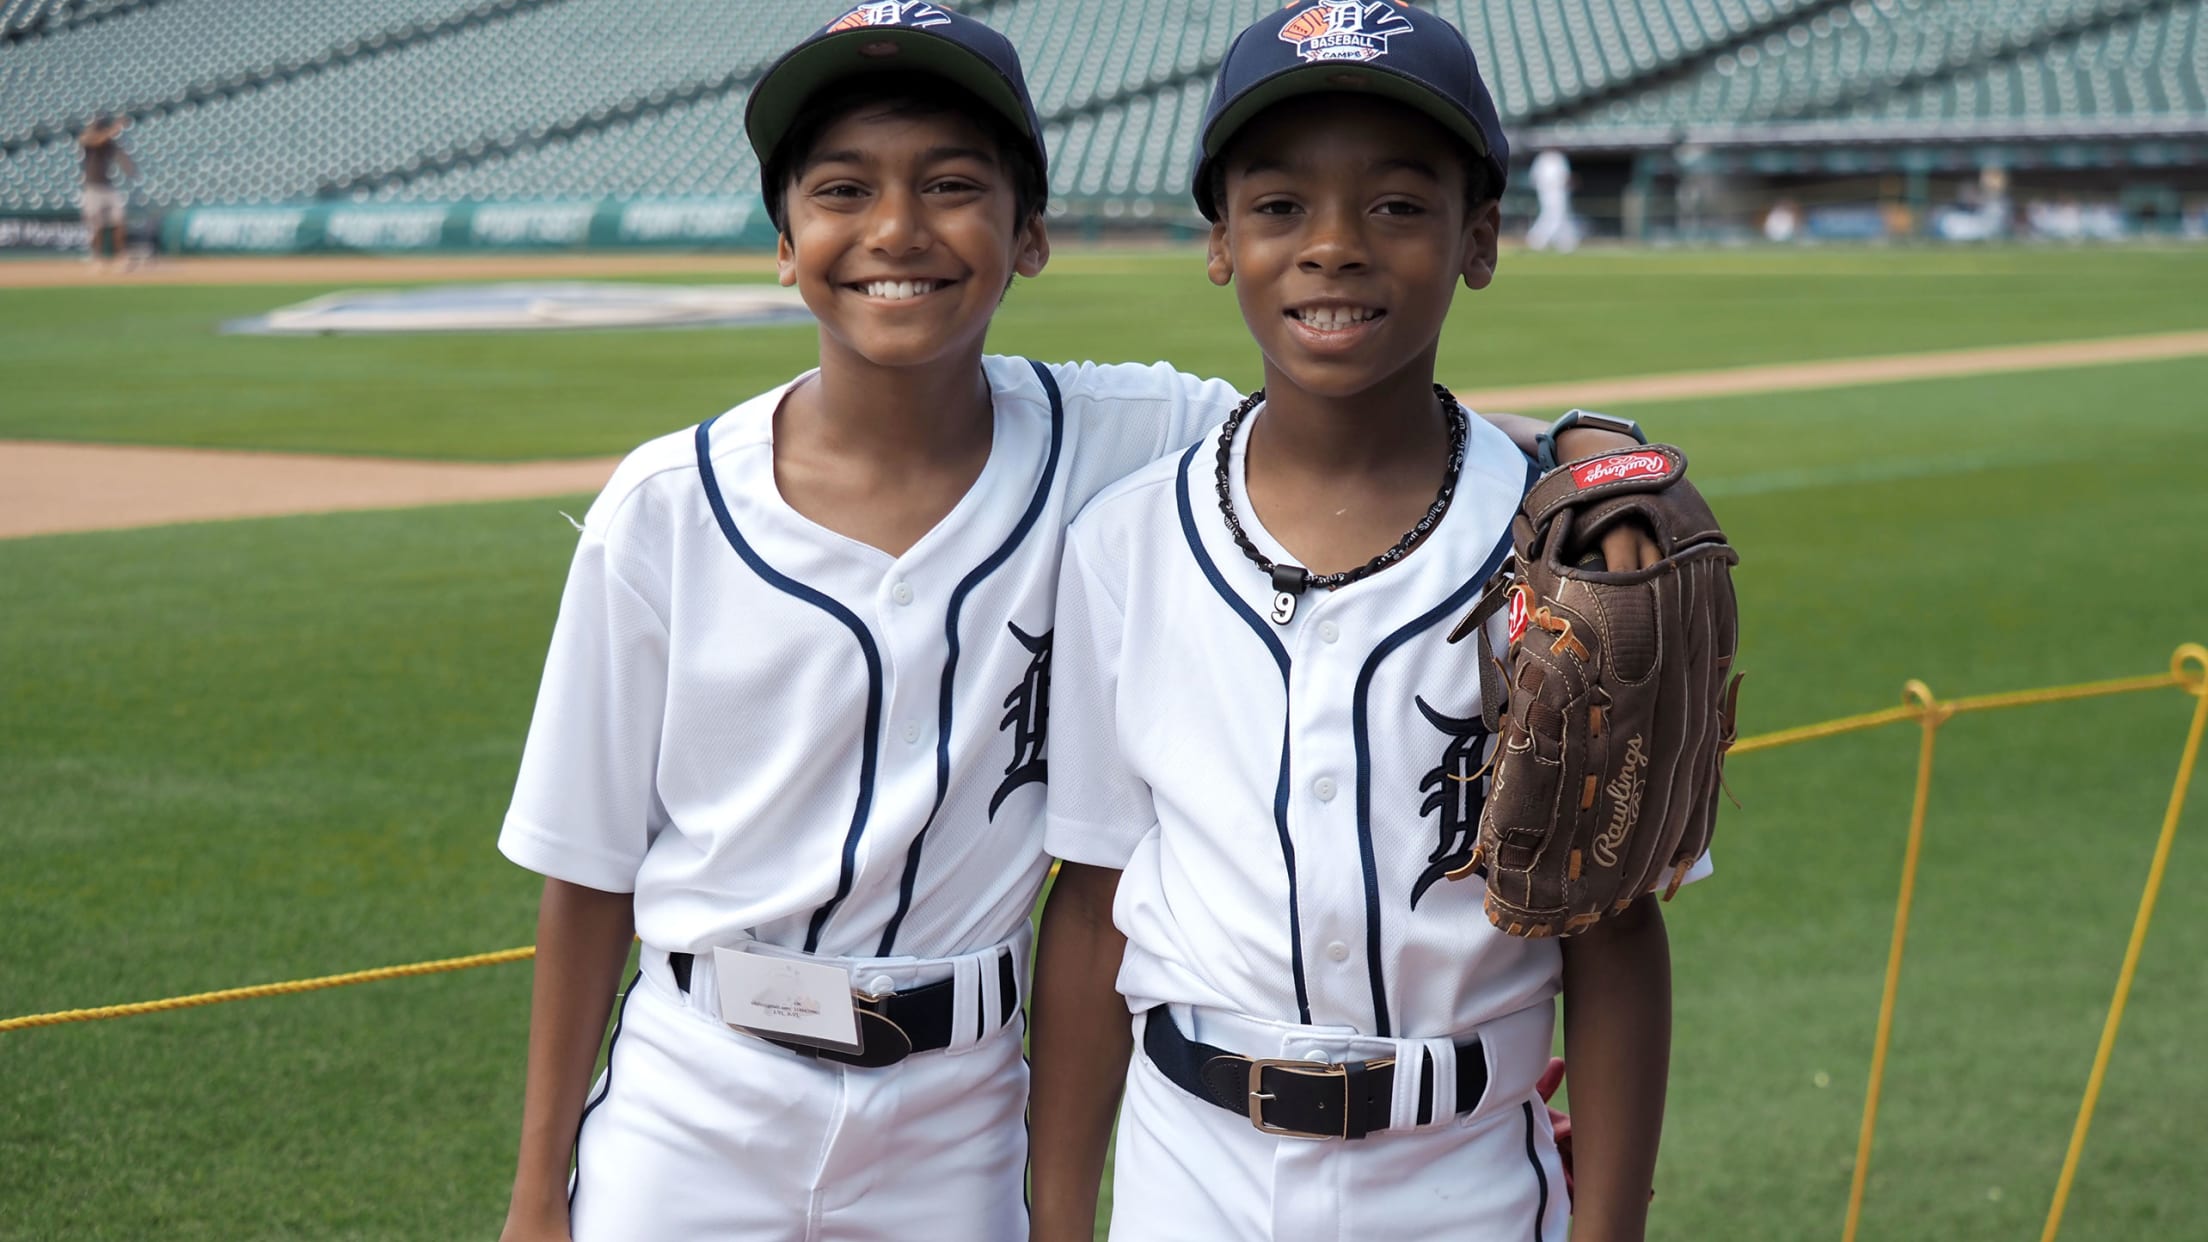 8 Reasons Why Youth Baseball is Great for Your Kids - Baseball